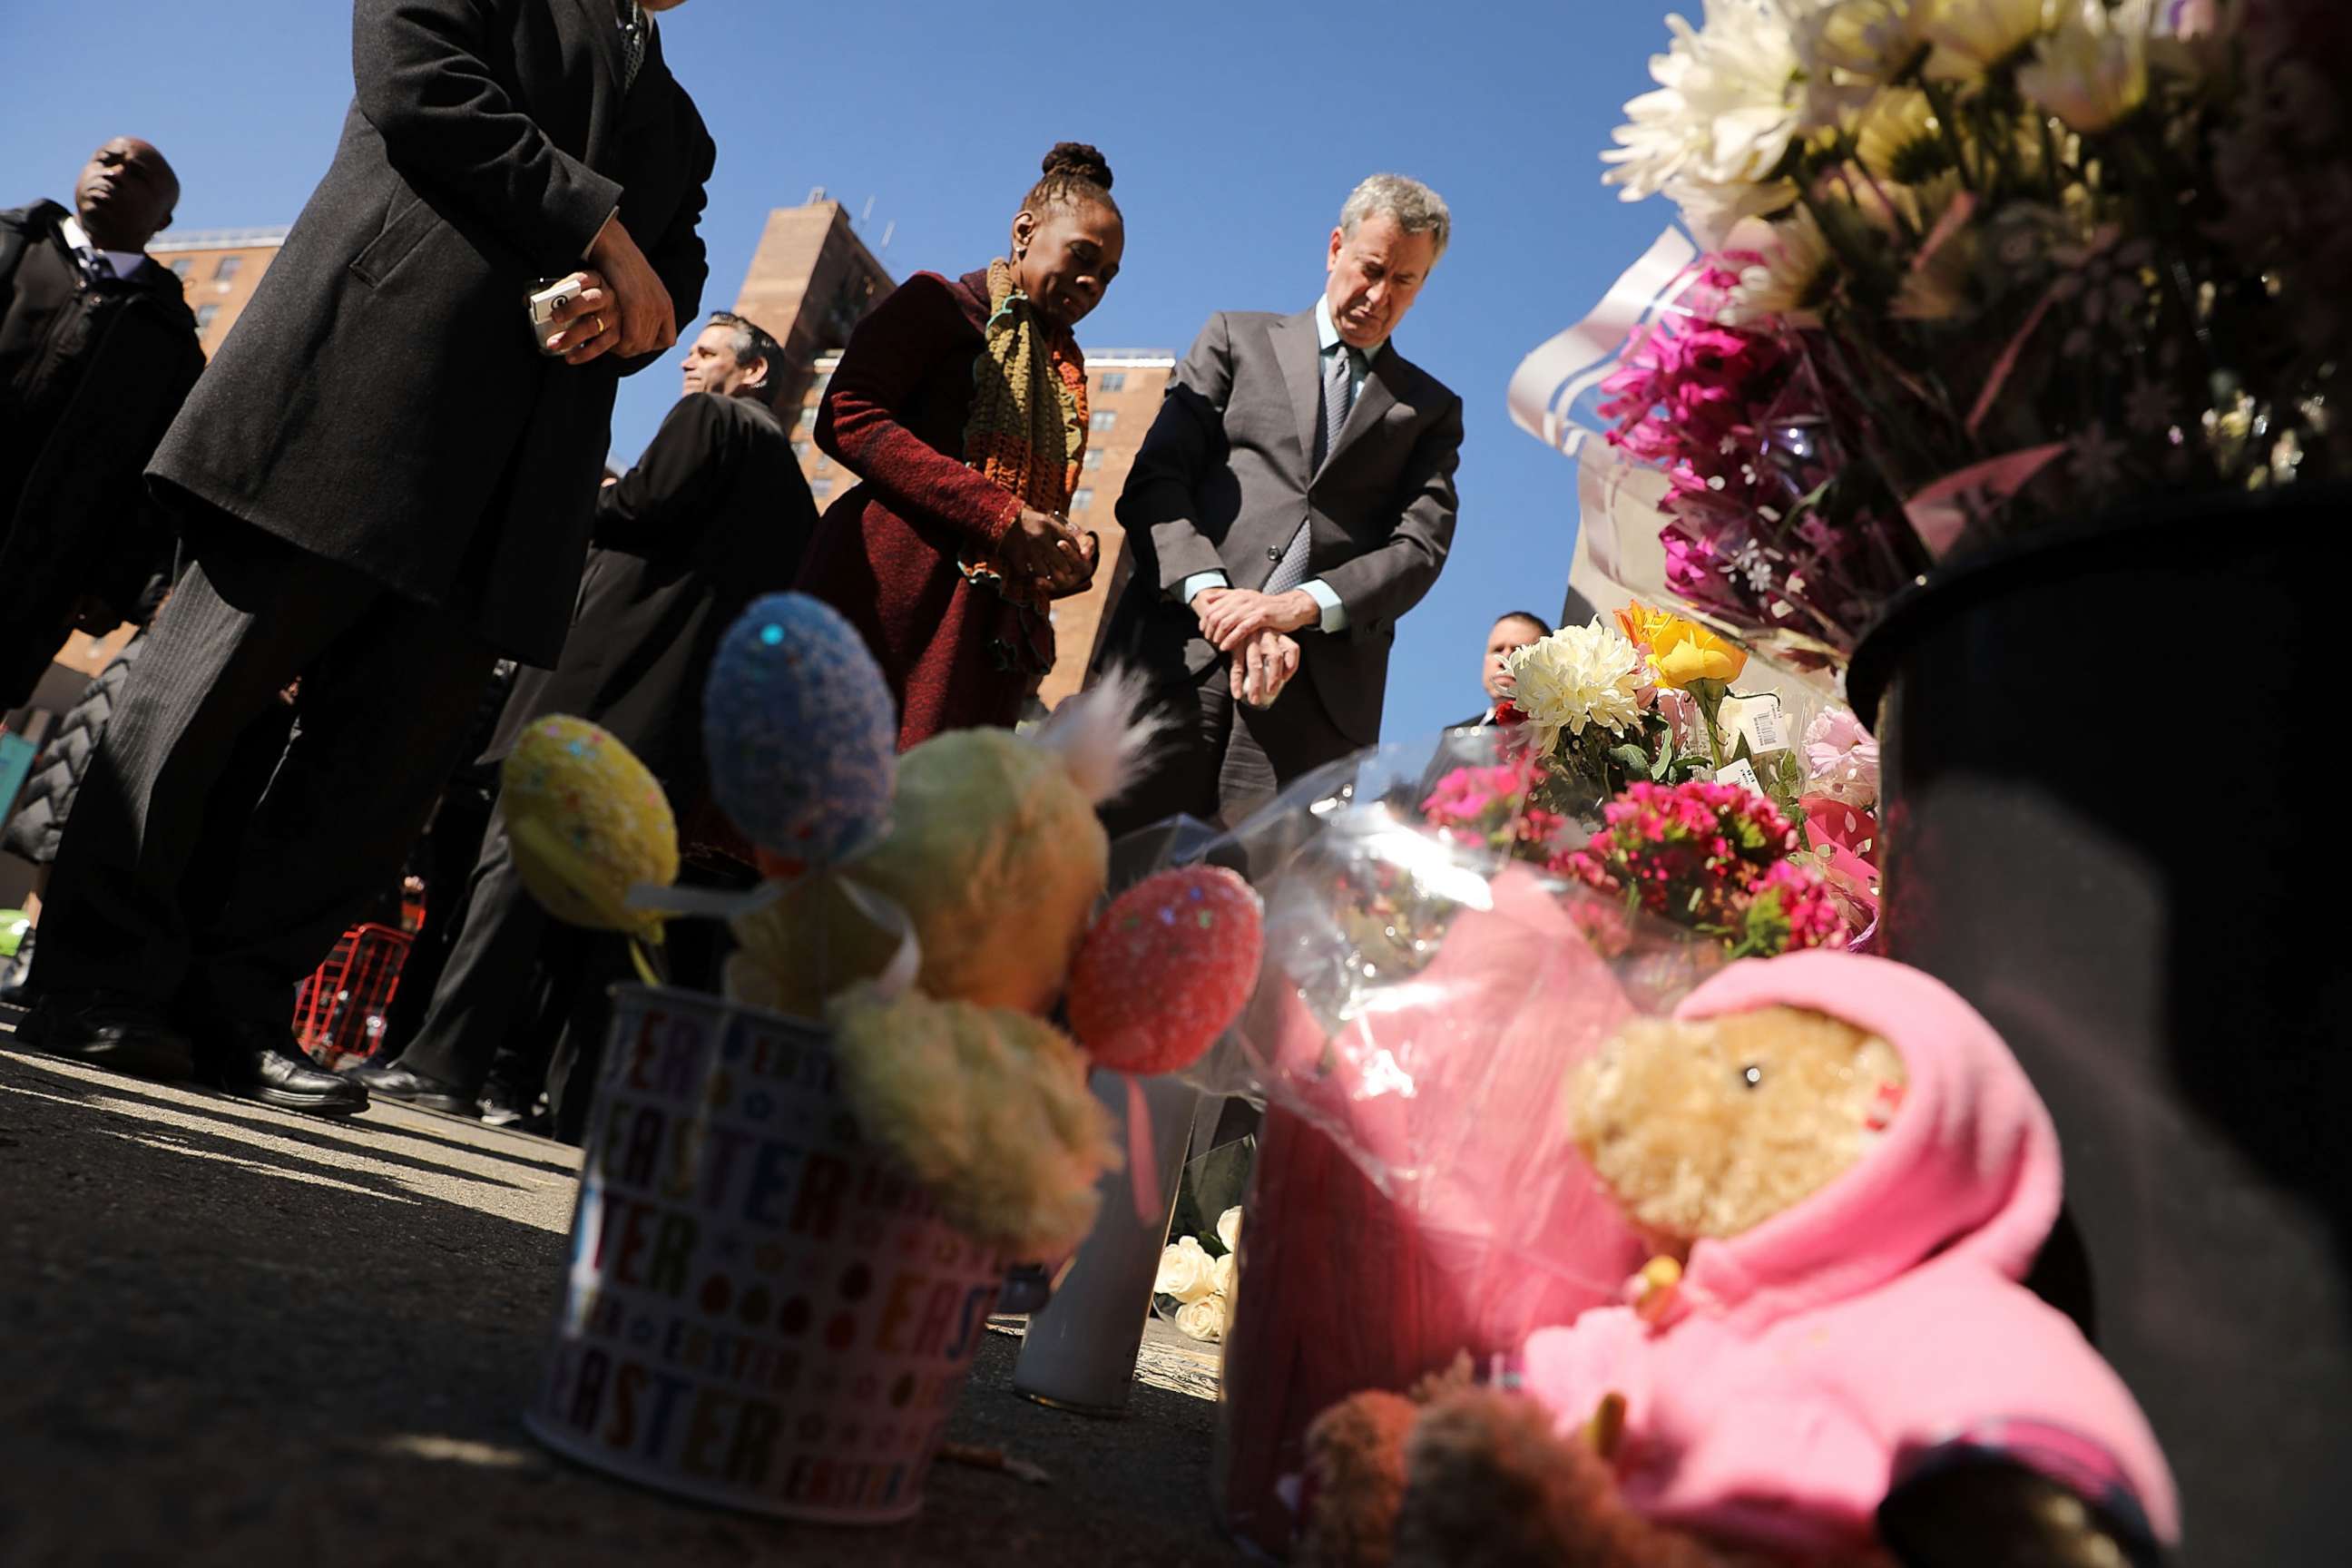 PHOTO: New York Mayor Bill de Blasio is joined by his wife Chirlane McCray and Councilman Brad Lander at a memorial at the site of an accident where two small children were killed by a driver in Brooklyn, March 7, 2018.